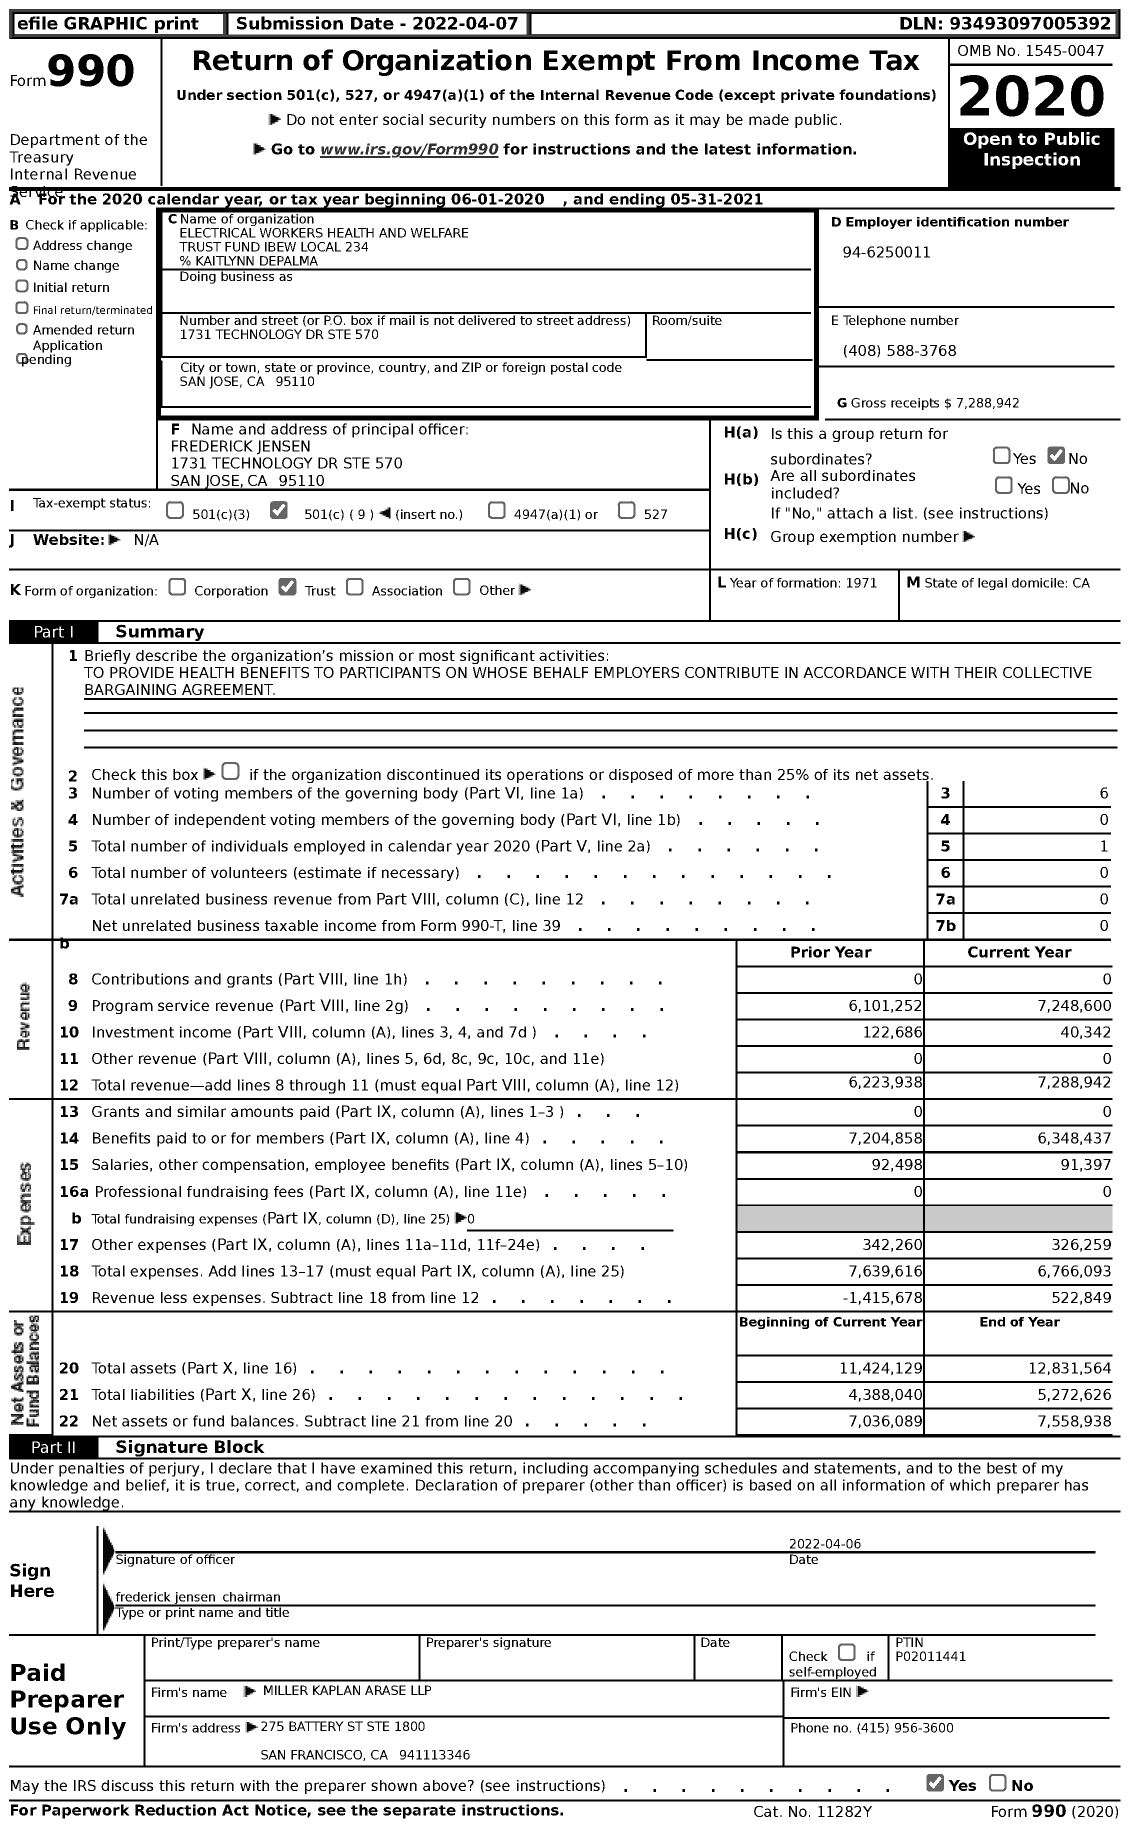 Image of first page of 2020 Form 990 for Electrical Workers Health and Welfare Trust Fund IBEW Local 234